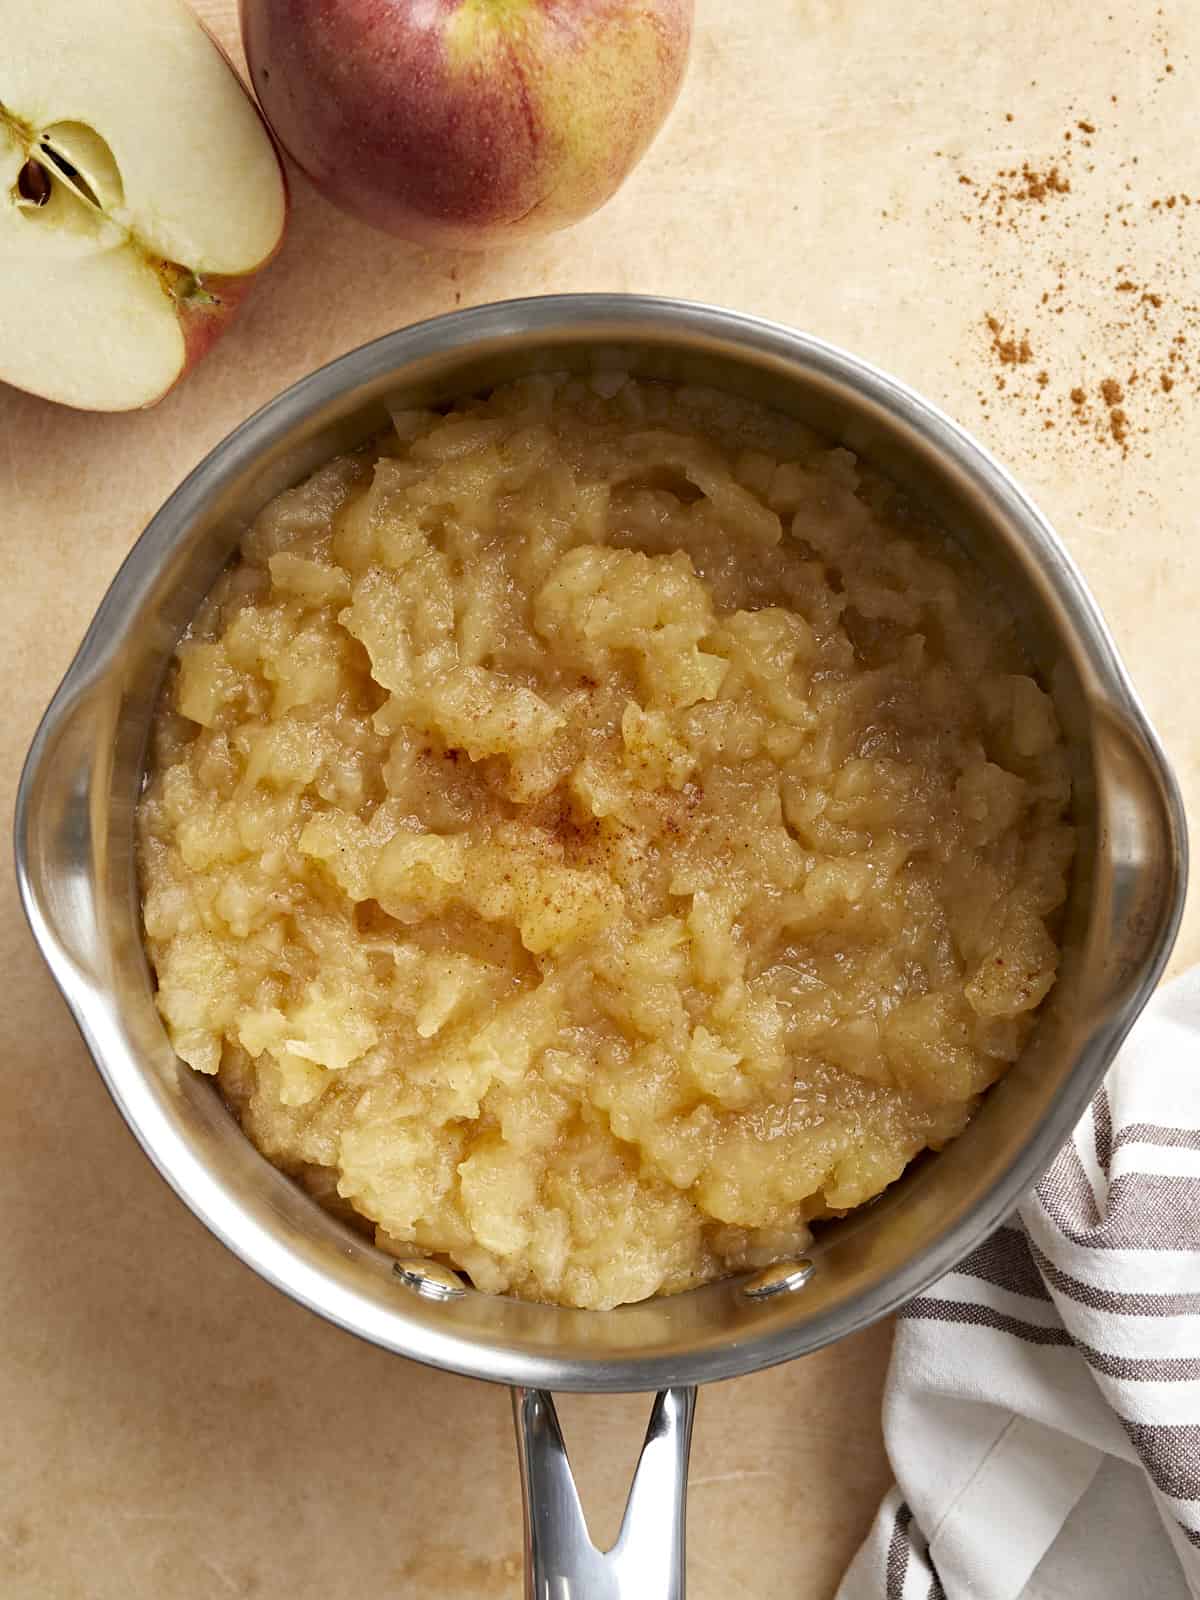 Homemade applesauce in a small saucepan with apples and a napkin on the side.